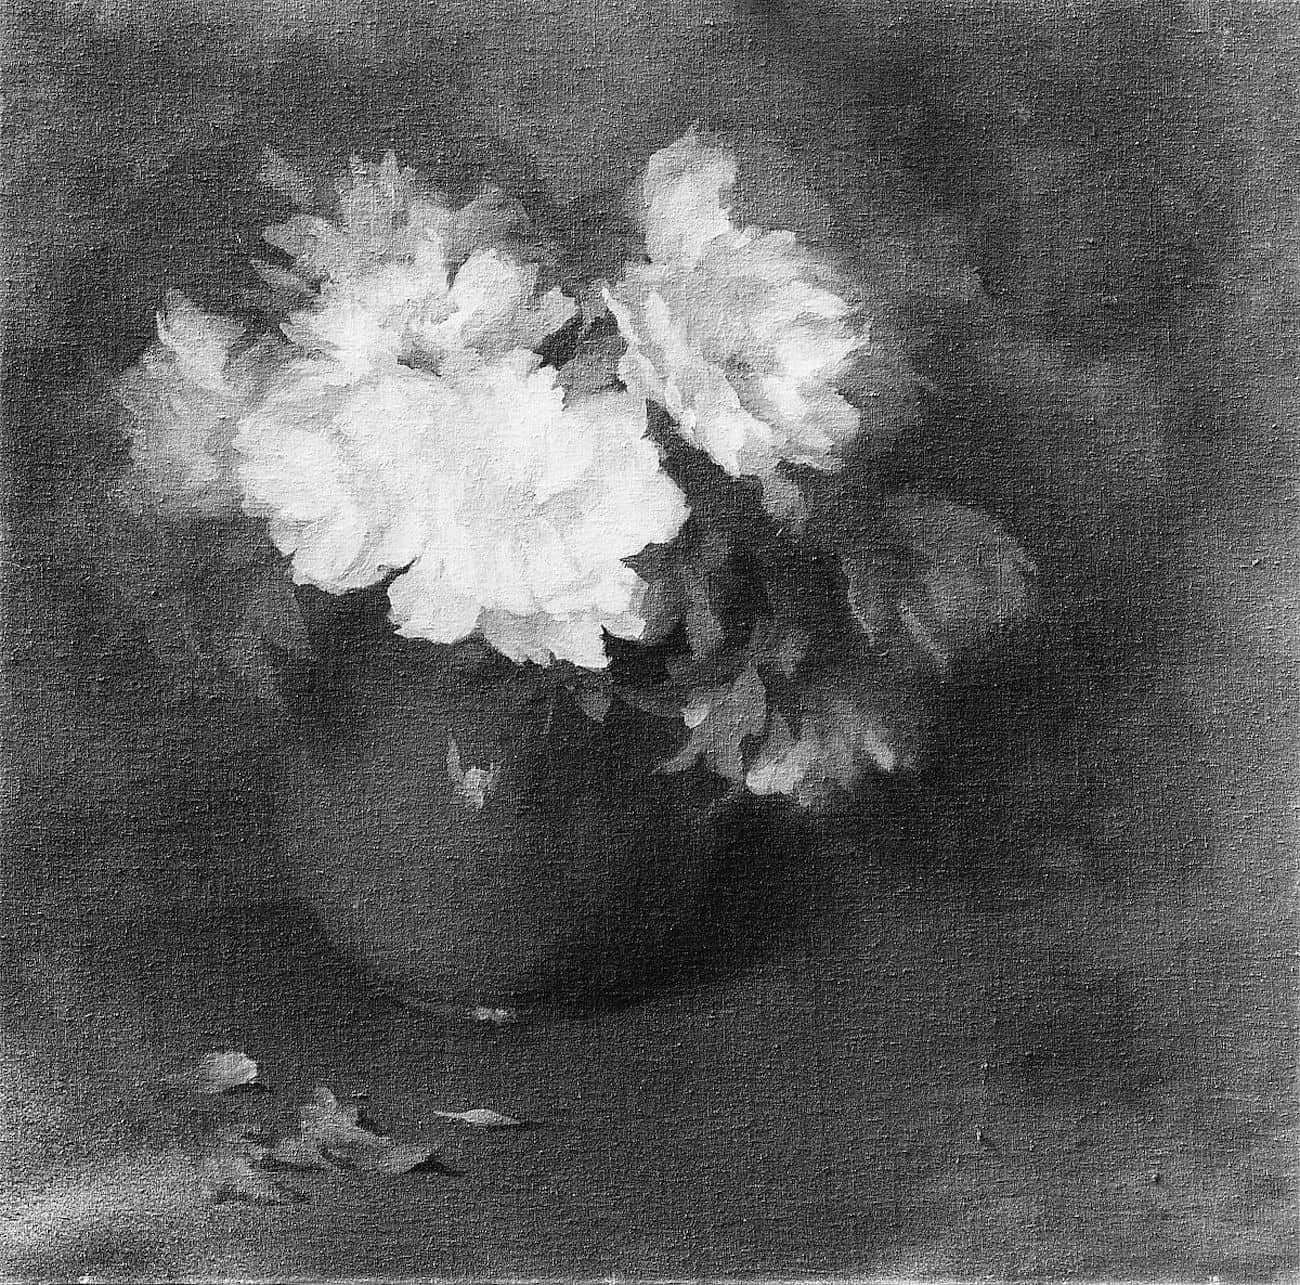 Peonies, ca. 1910, Wilton Lockwood, The Metropolitan Museum of Art (article on the human condition quotes)